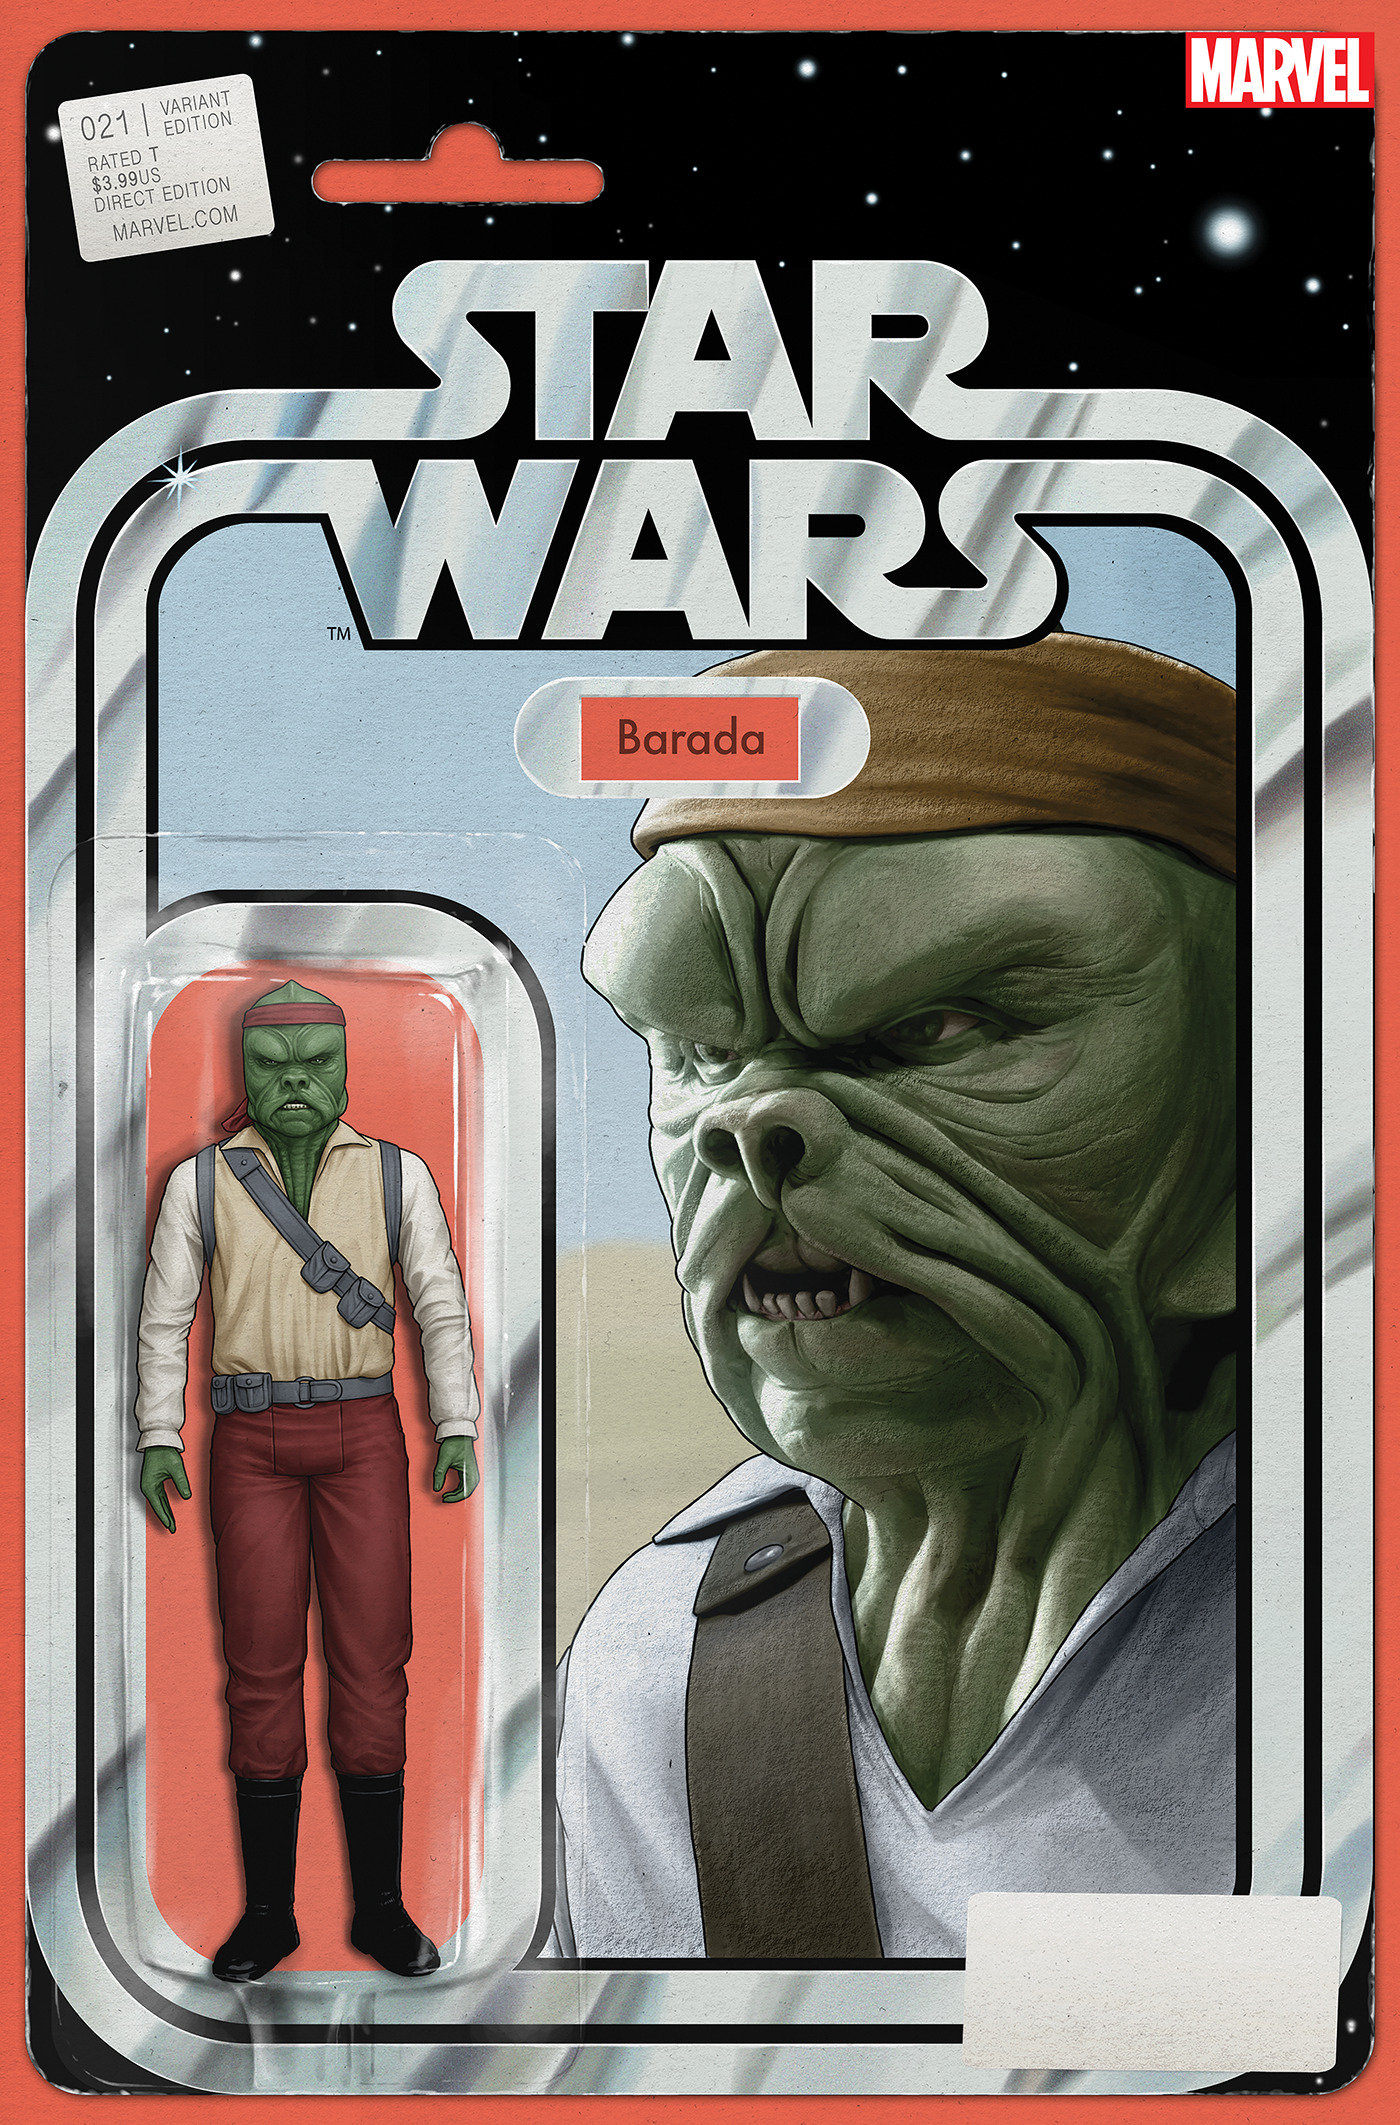 Star Wars #21 ("Barada" Action Figure Variant Cover) (02.03.2022)